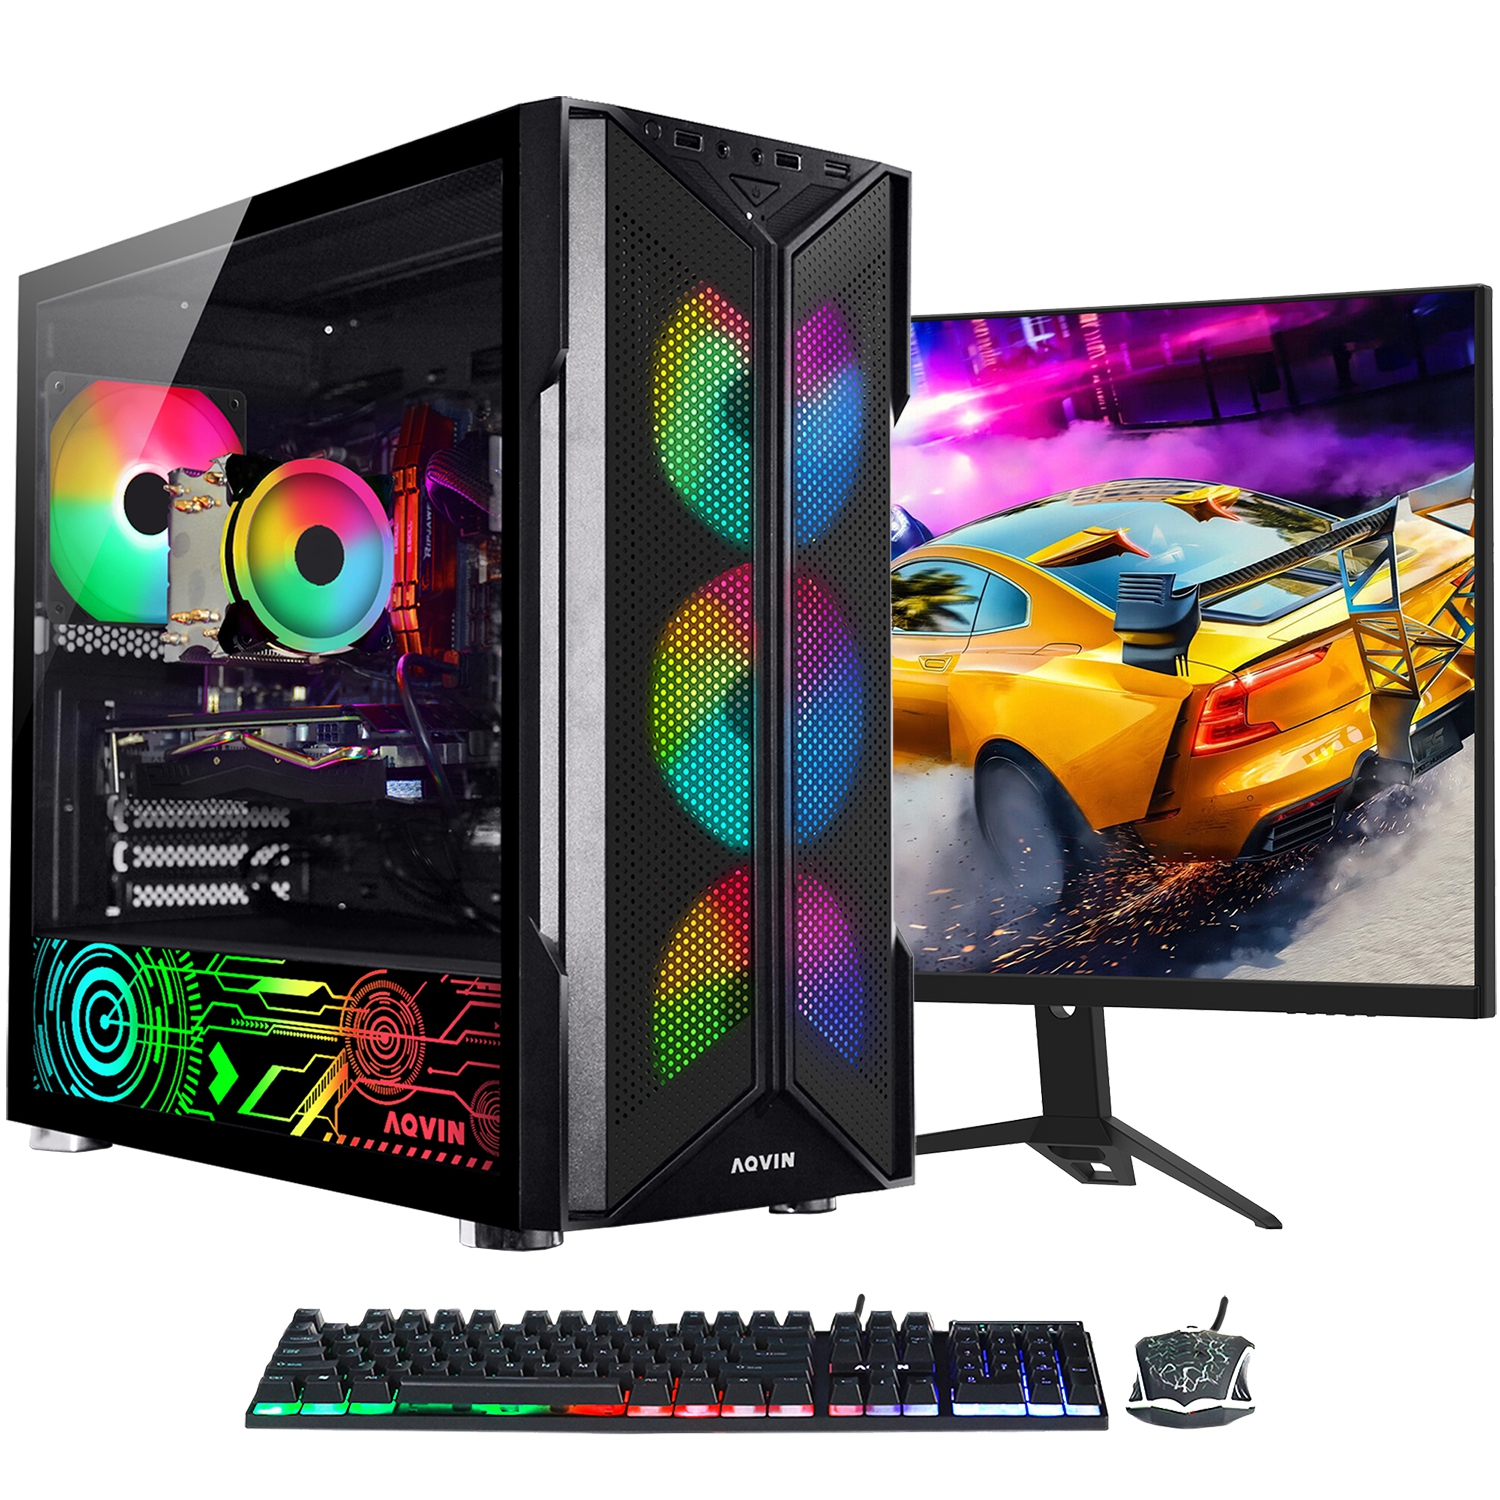 AQVIN-AQ20 Gaming PC Desktop Computer Tower- New 24 inch Curved Gaming Monitor (Intel Core i7/ 32GB RAM/ 2TB SSD/ GeForce GTX 1650 4GB/ Windows 11) - Only at Best Buy